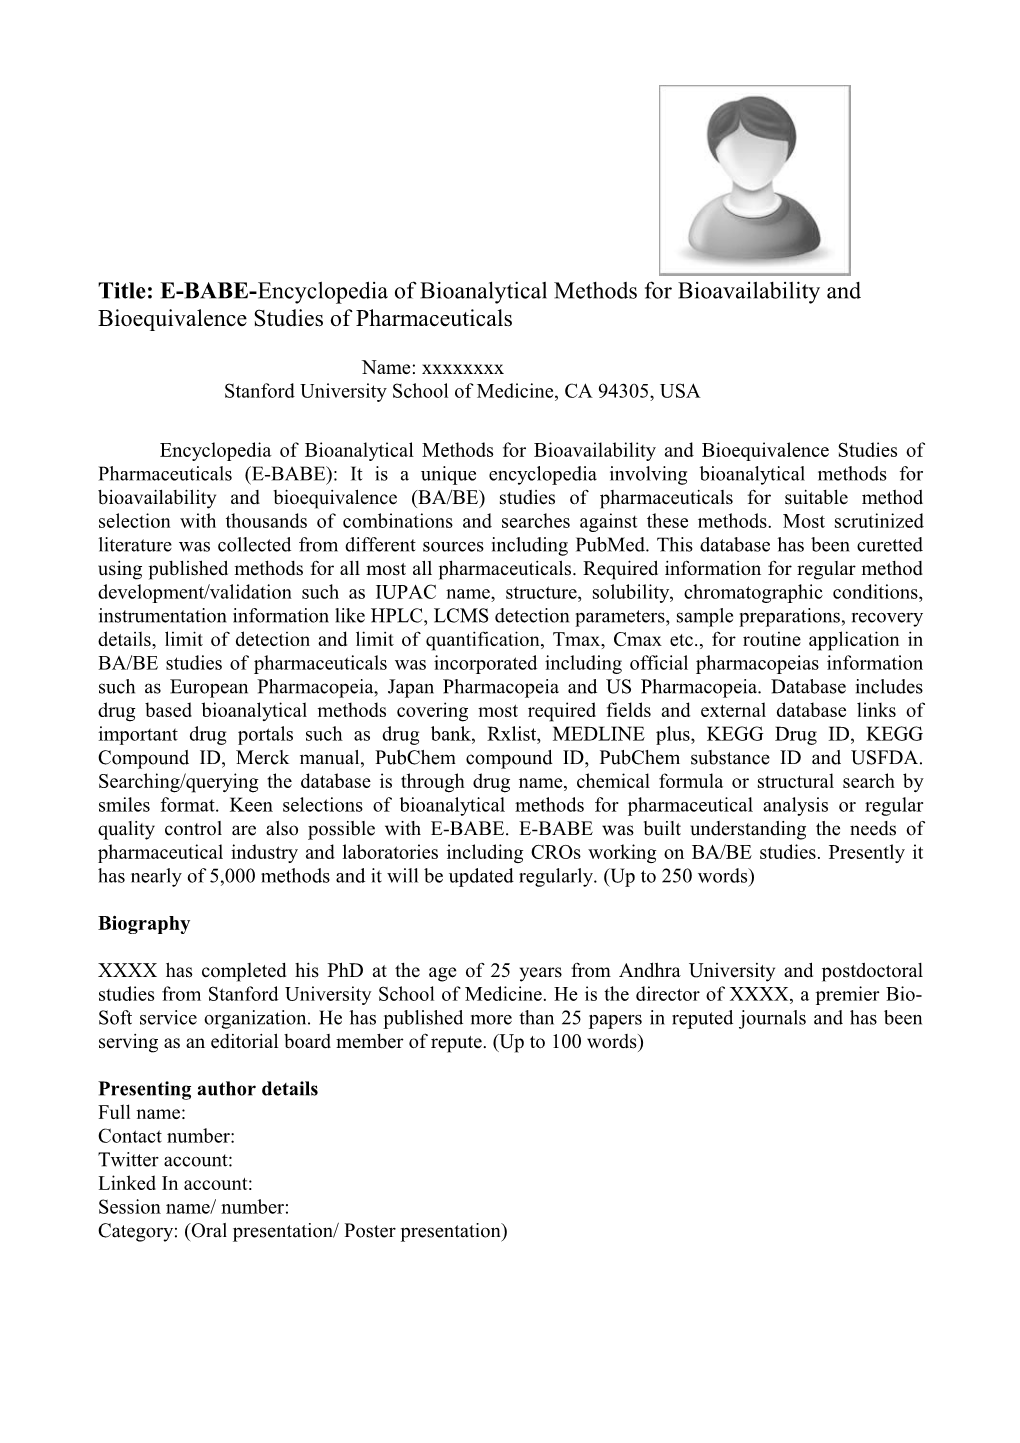 Title: E-BABE-Encyclopedia of Bioanalytical Methods for Bioavailability and Bioequivalence s2